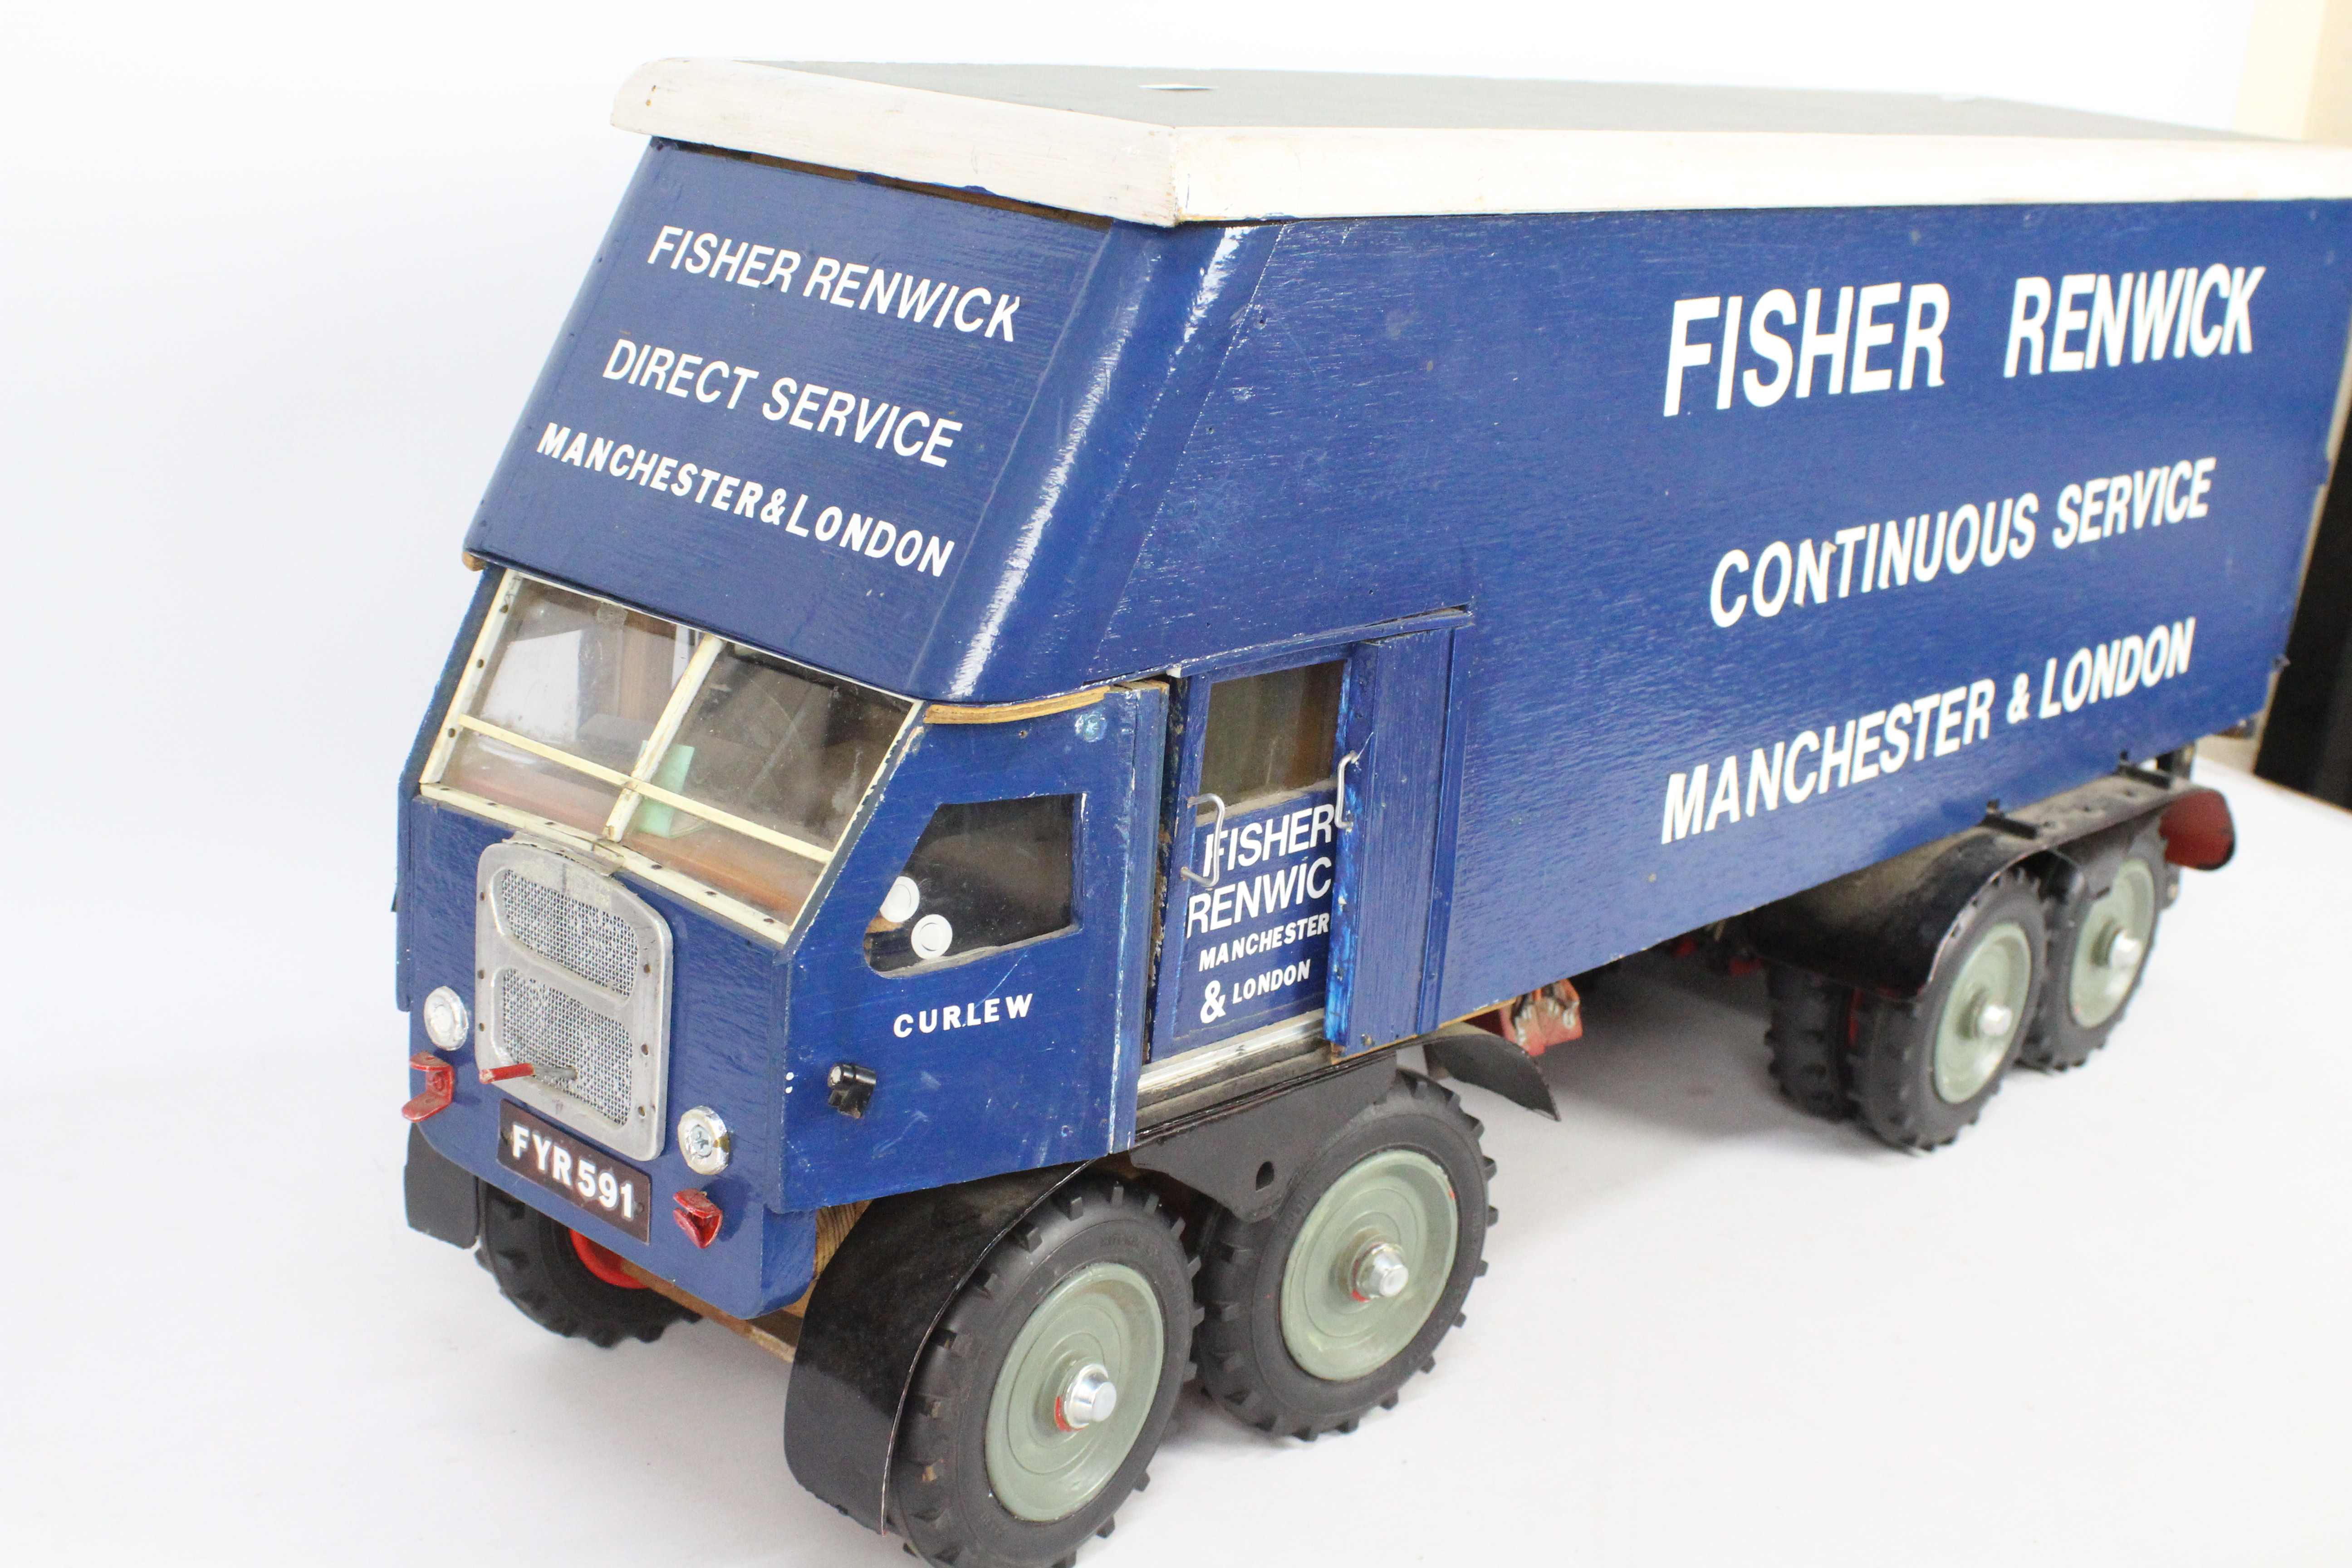 A scratch built wooden removals truck 'Fisher Renwick', measuring approx. - Image 2 of 3